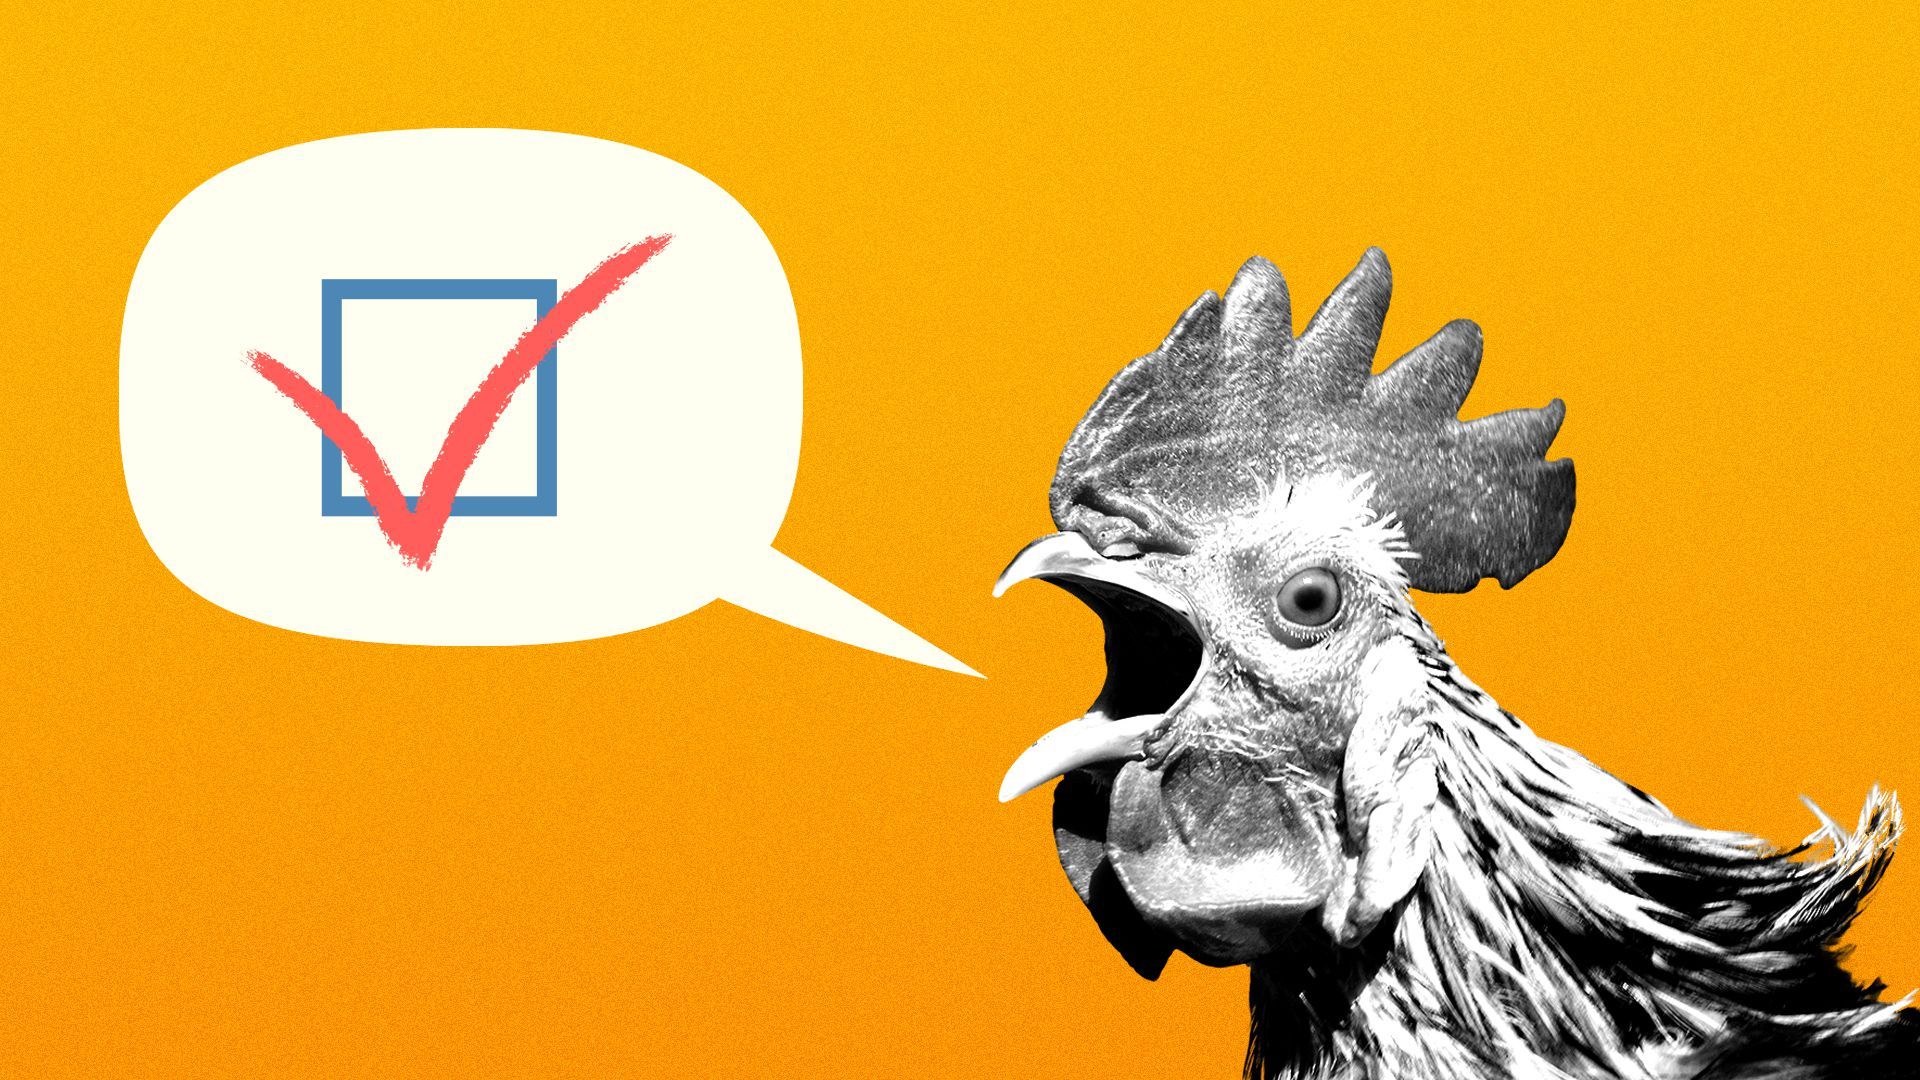 Illustration of a rooster with a word balloon with a checkmark in it coming out of its mouth.